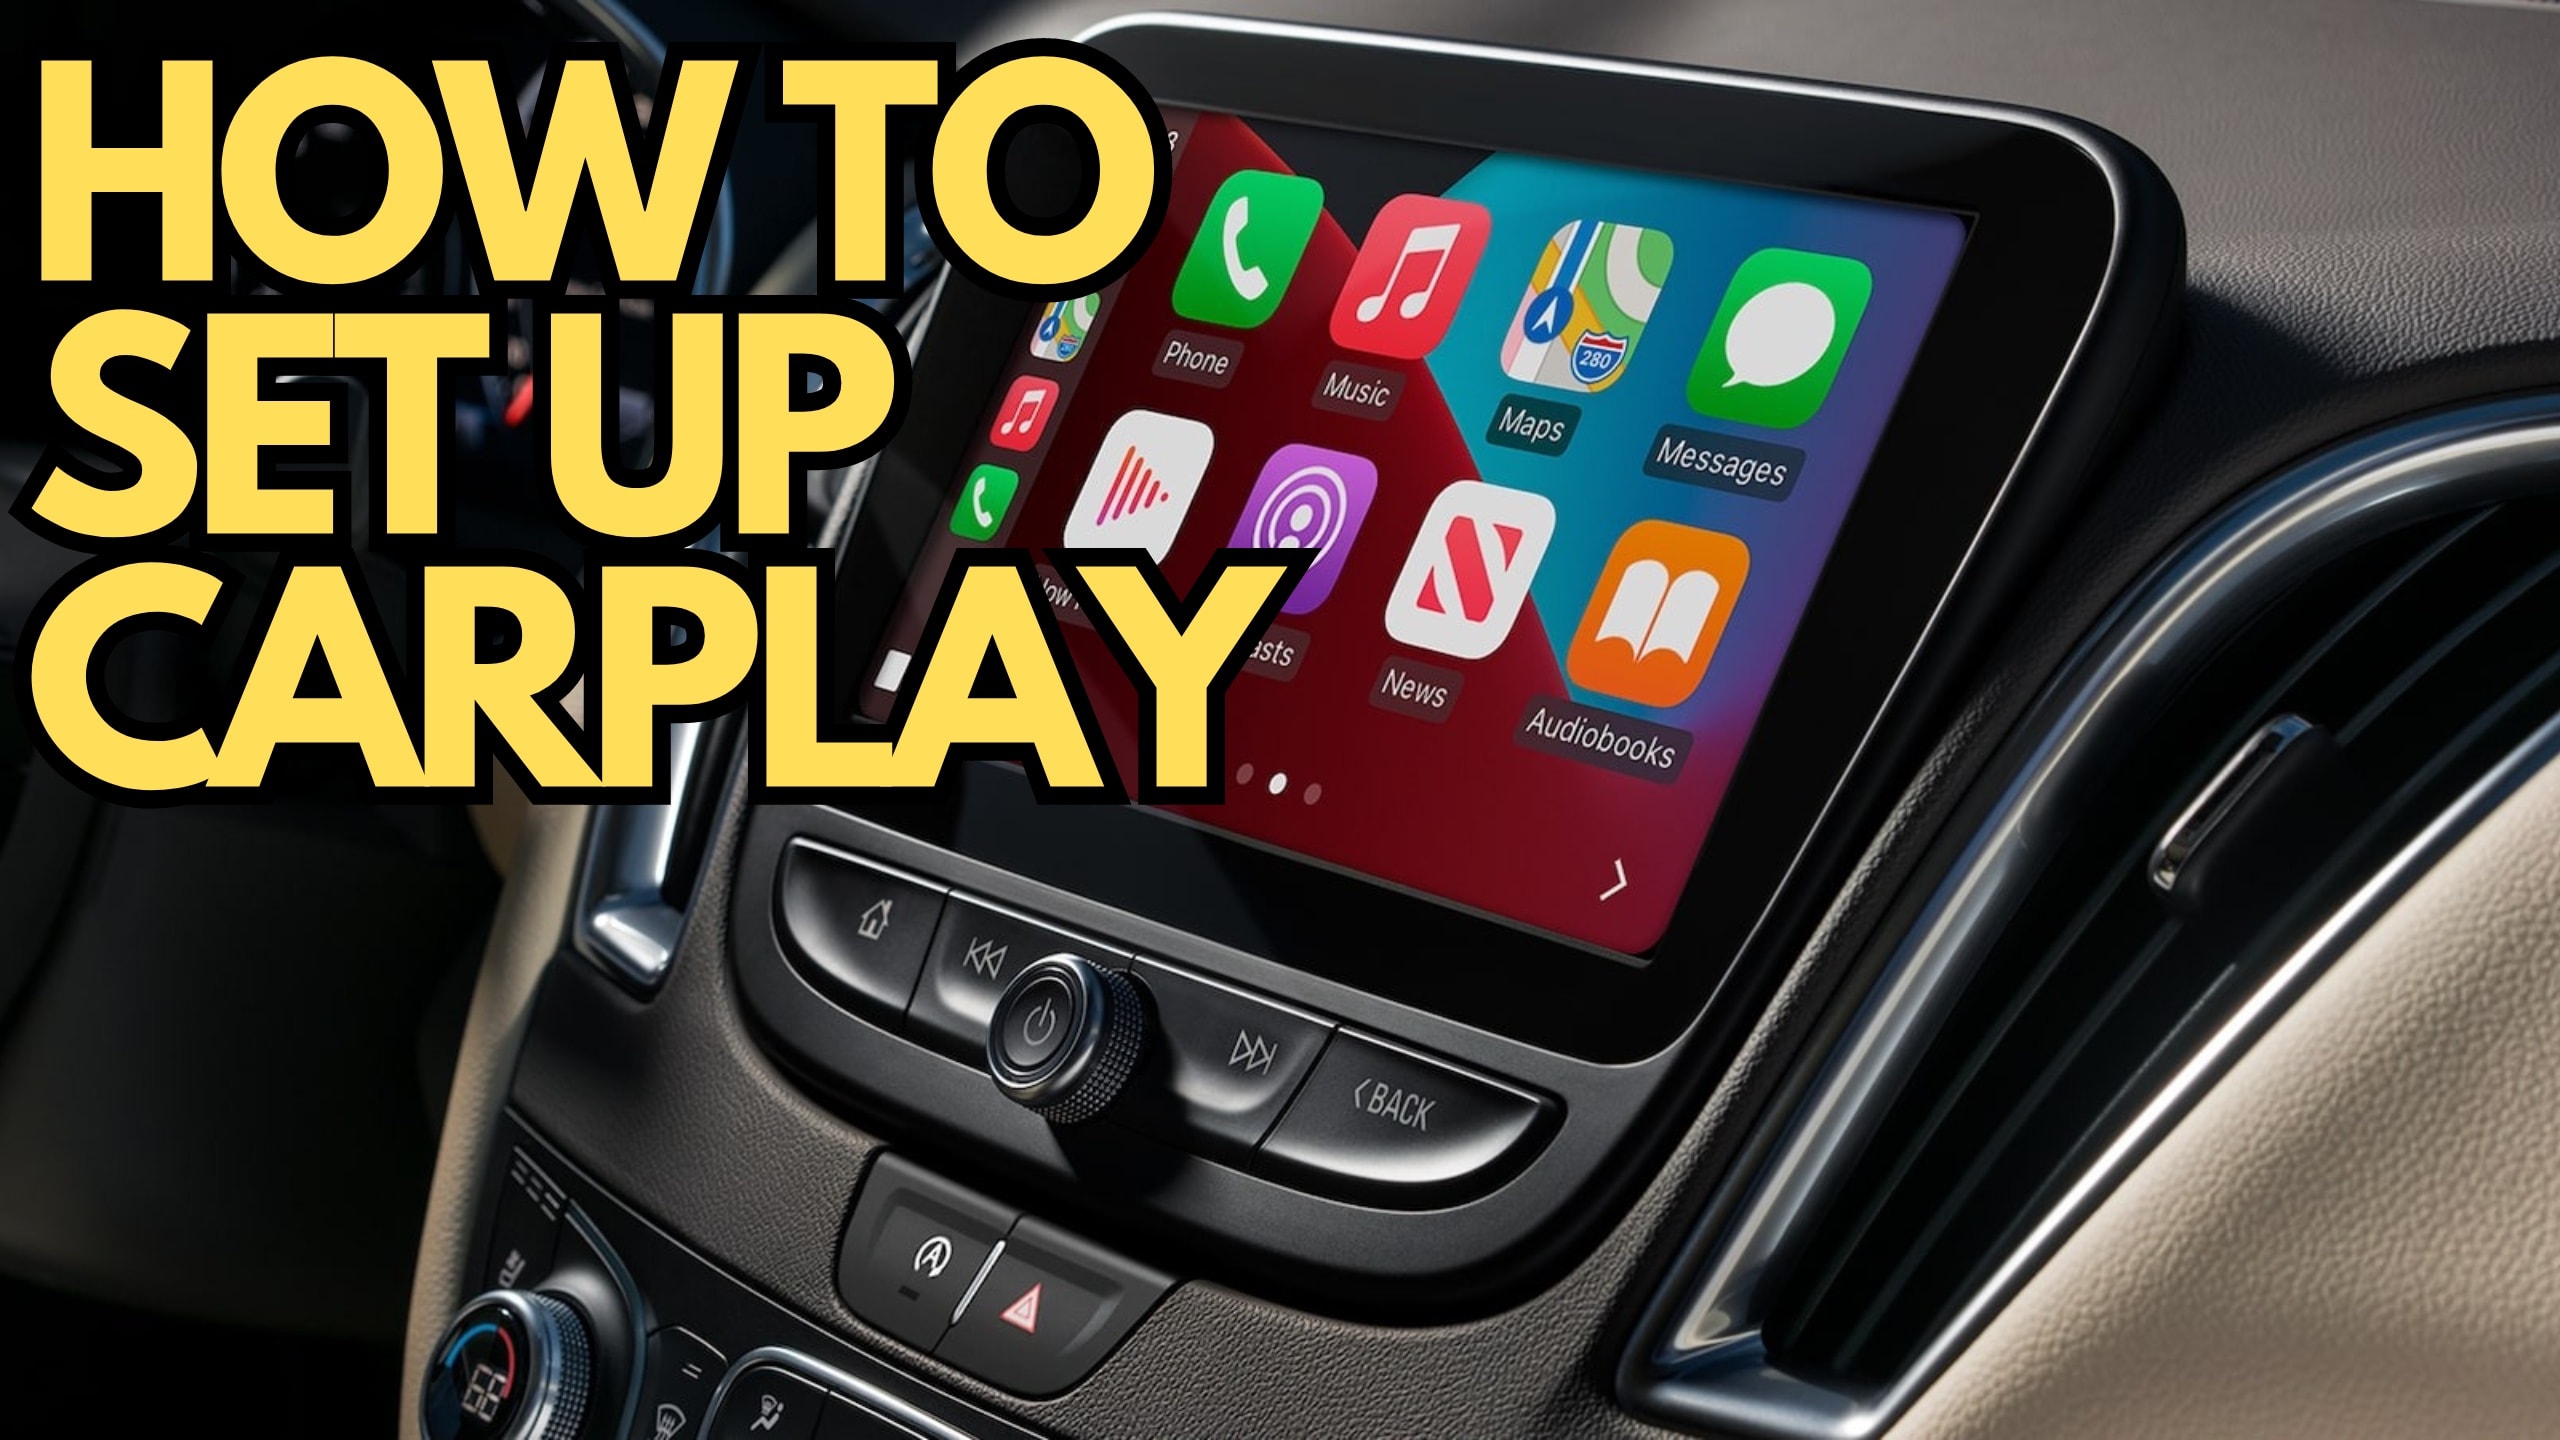 https://s1.cdn.autoevolution.com/images/news/forget-the-wires-how-to-set-up-wireless-carplay-in-your-new-chevrolet-221752_1.jpg